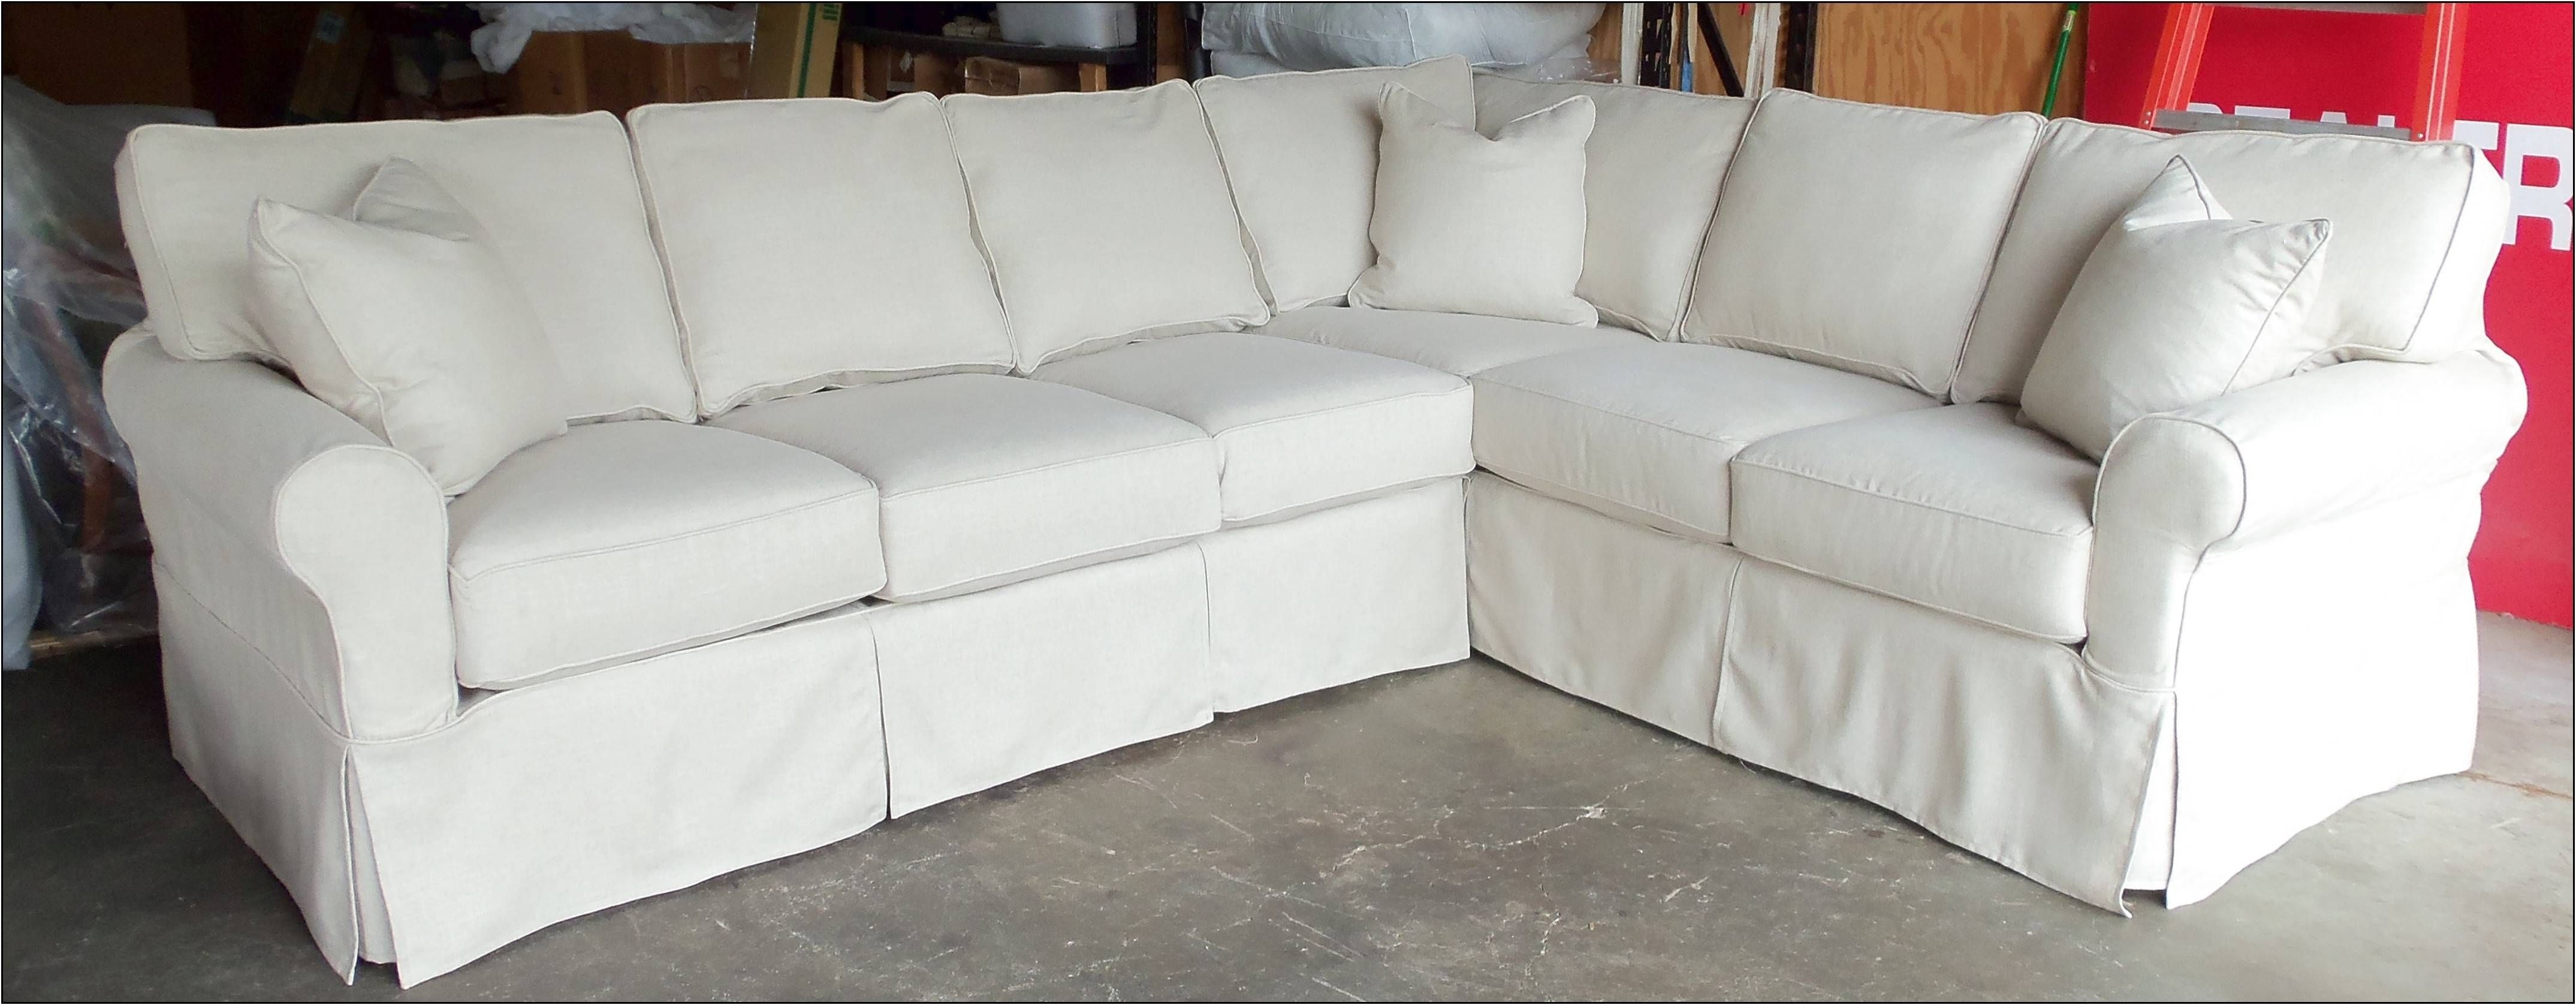 Sofas Center : White Sofa Slipcovers Cheapcheap Sectional Cheap For Clearance Sofa Covers (View 15 of 30)